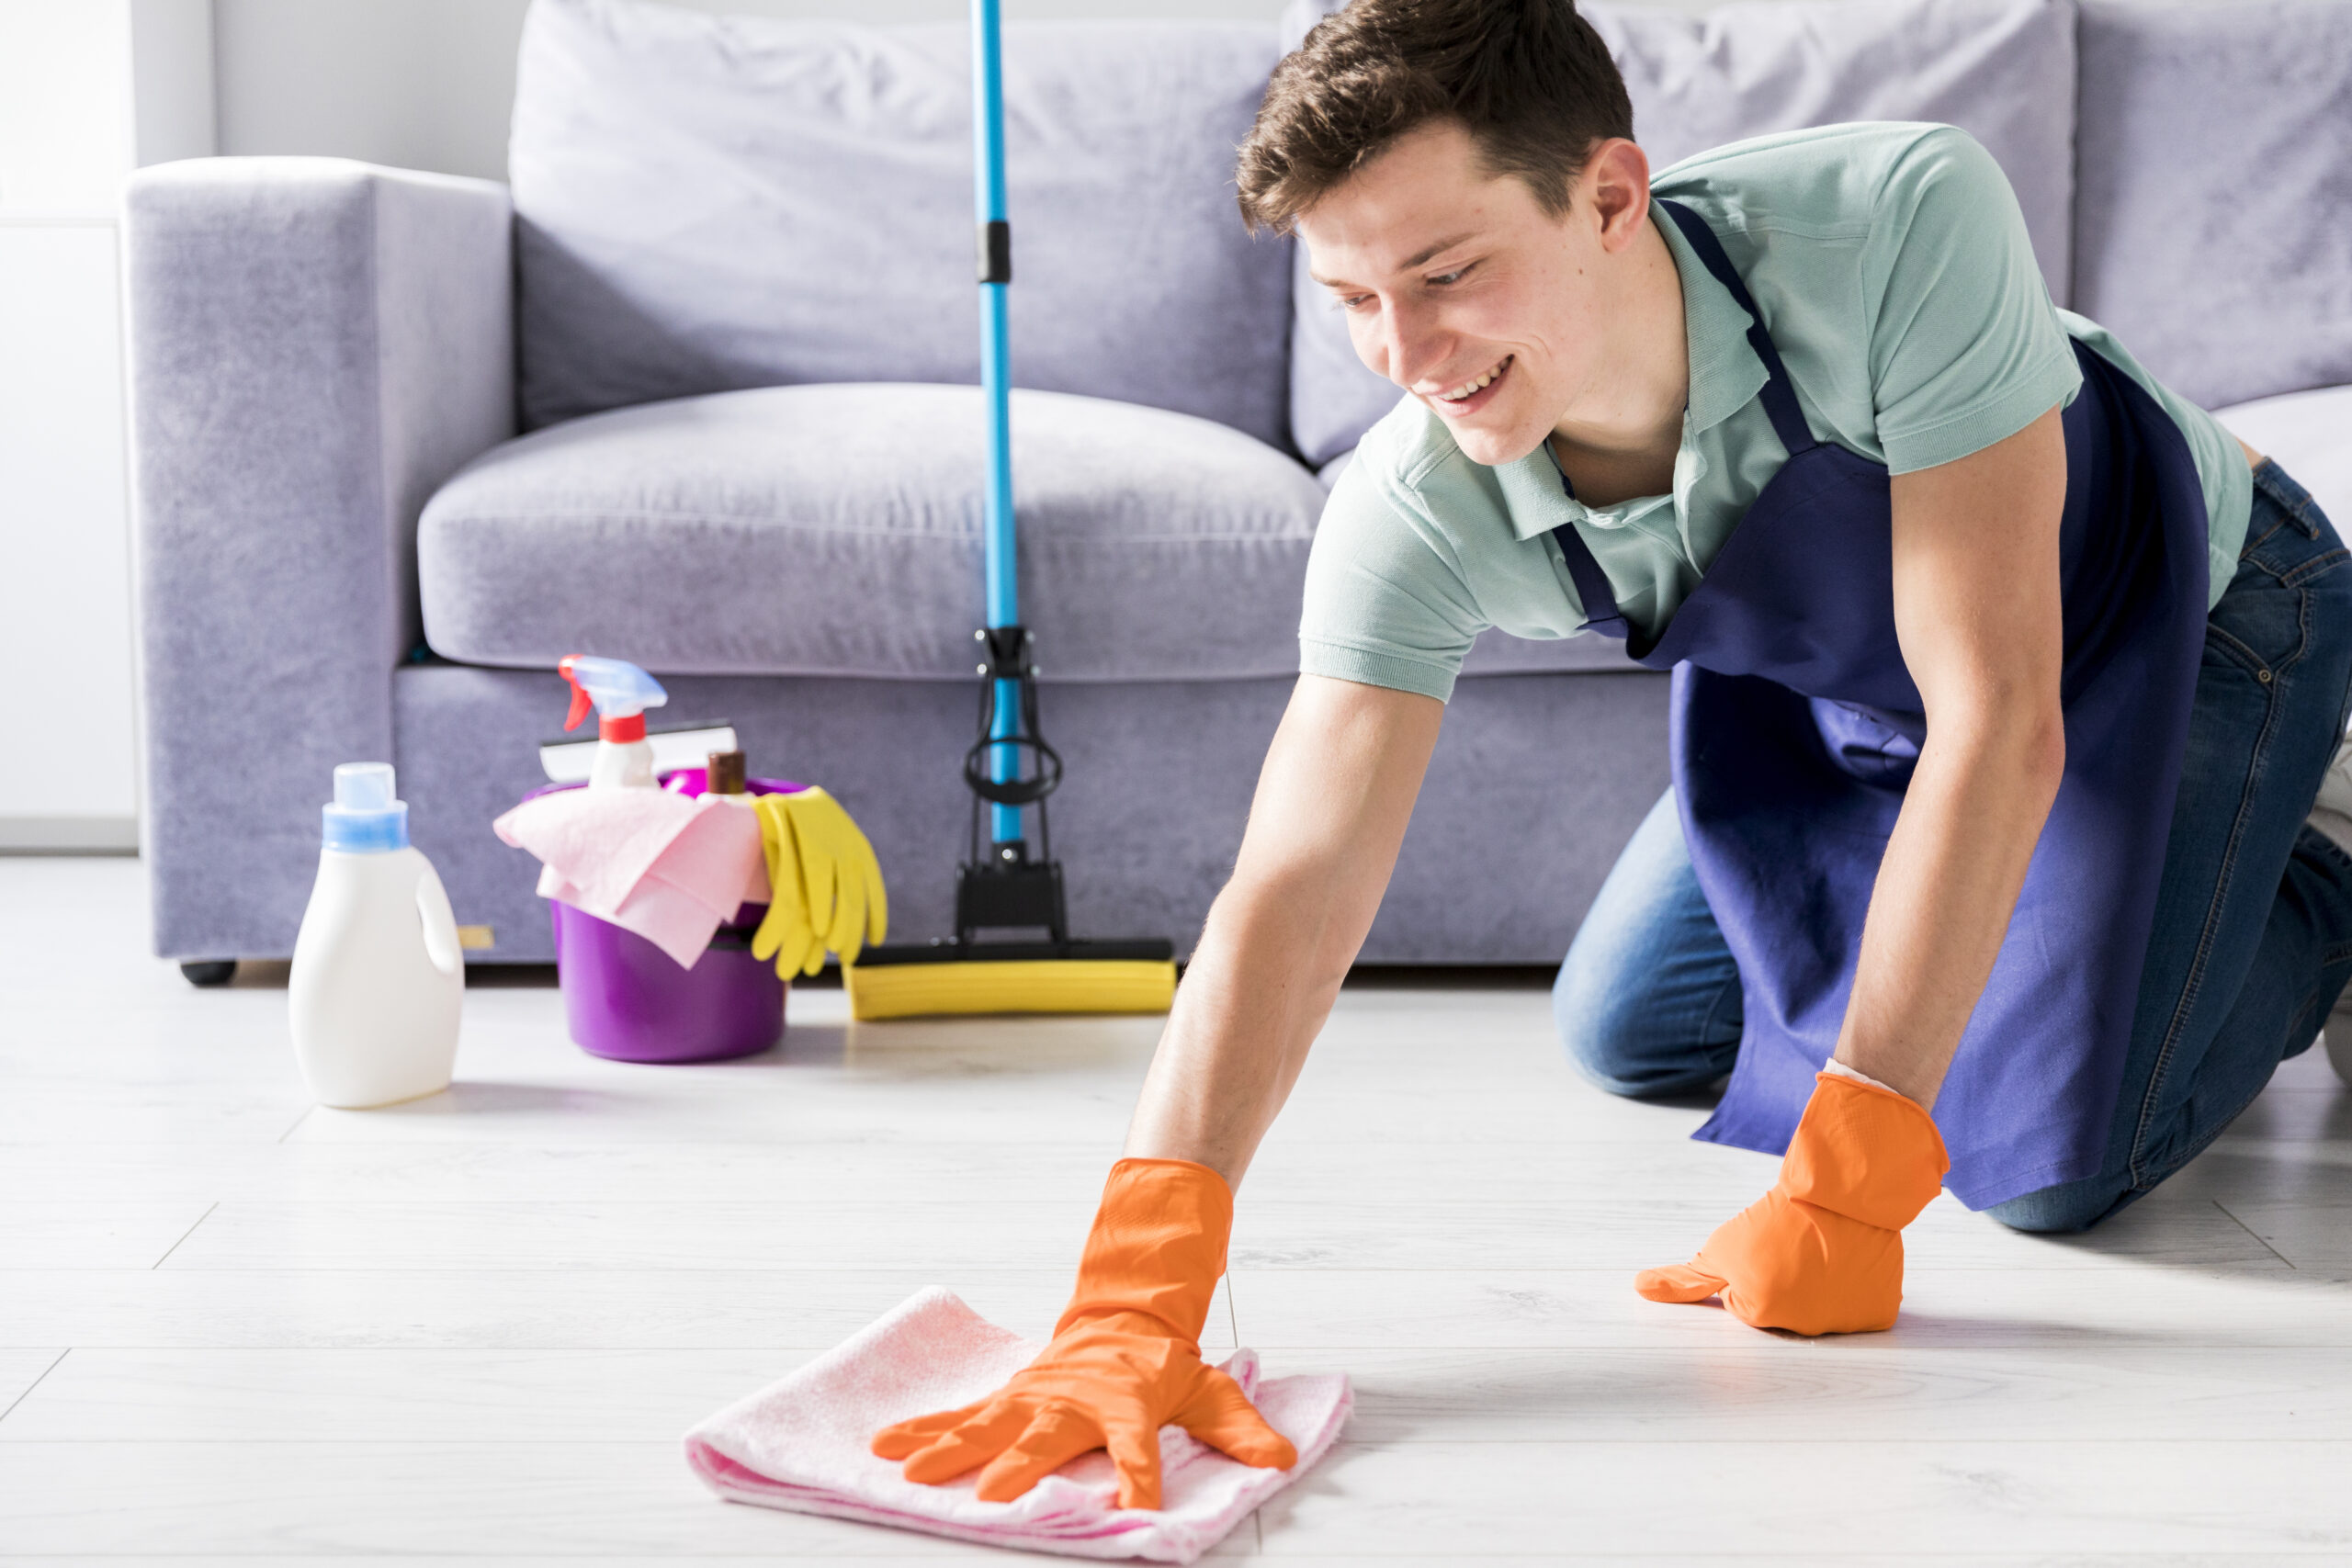 DIY Cleaning